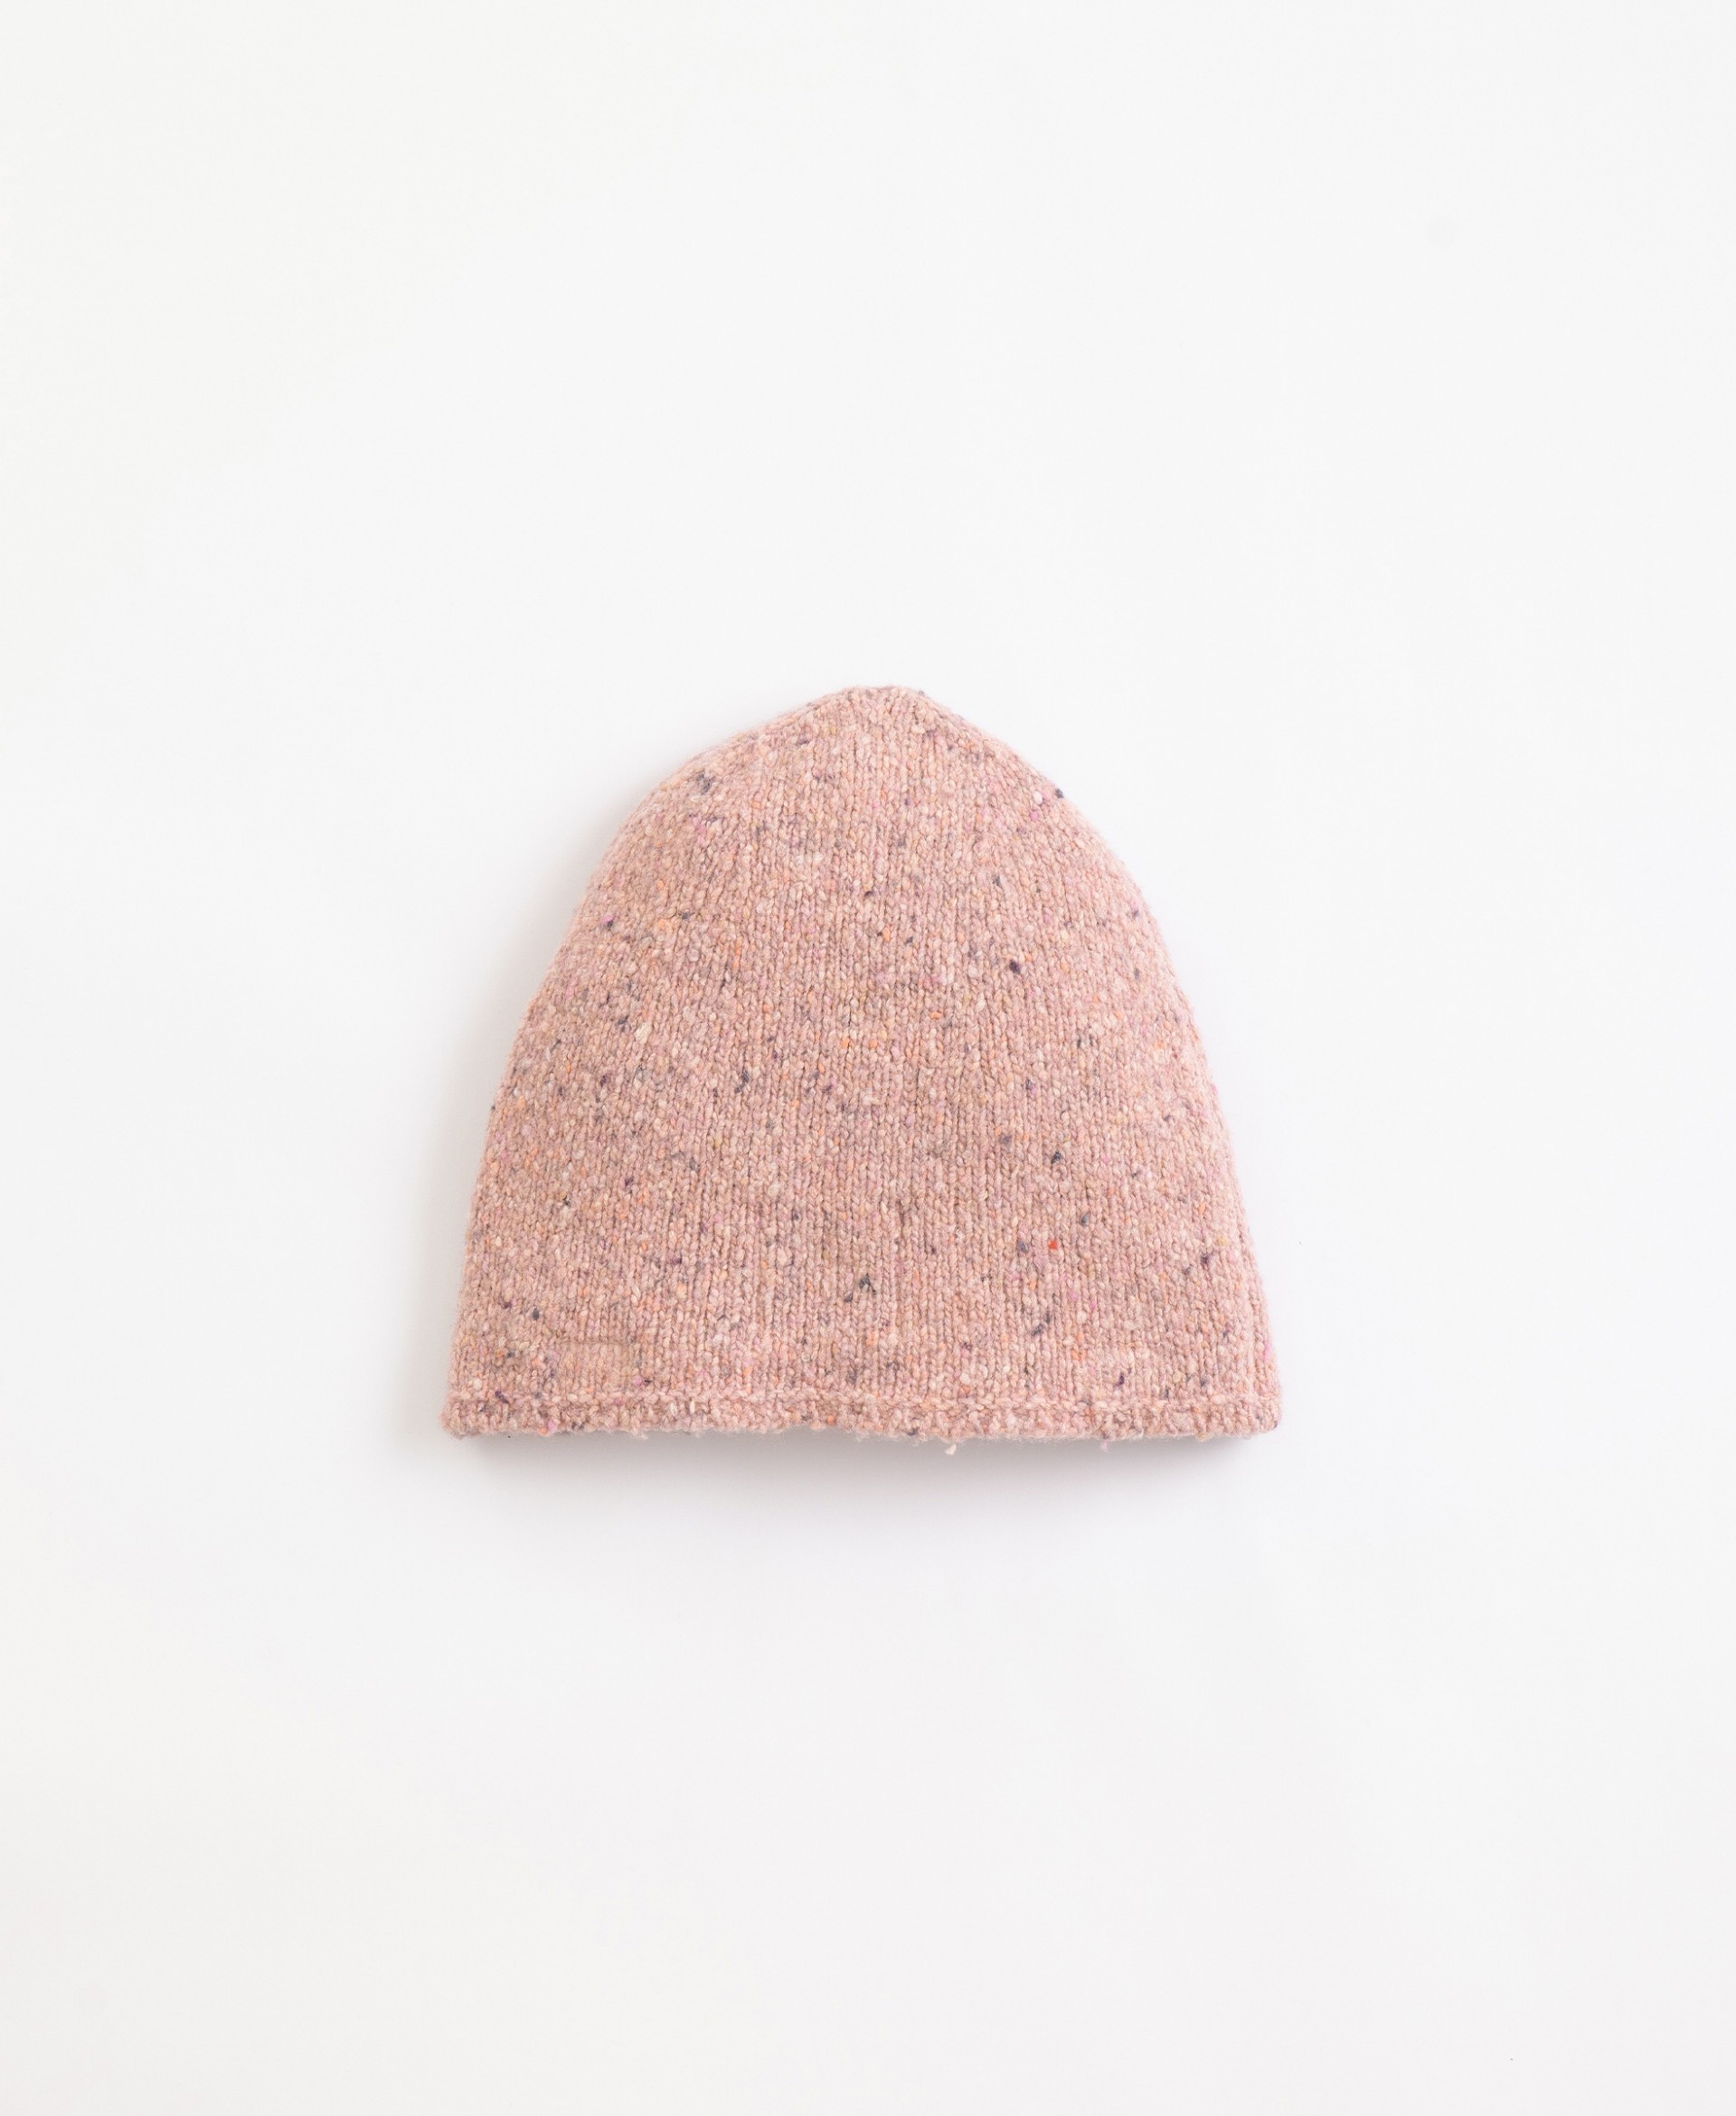 Beanie with recycled fibres | Illustration